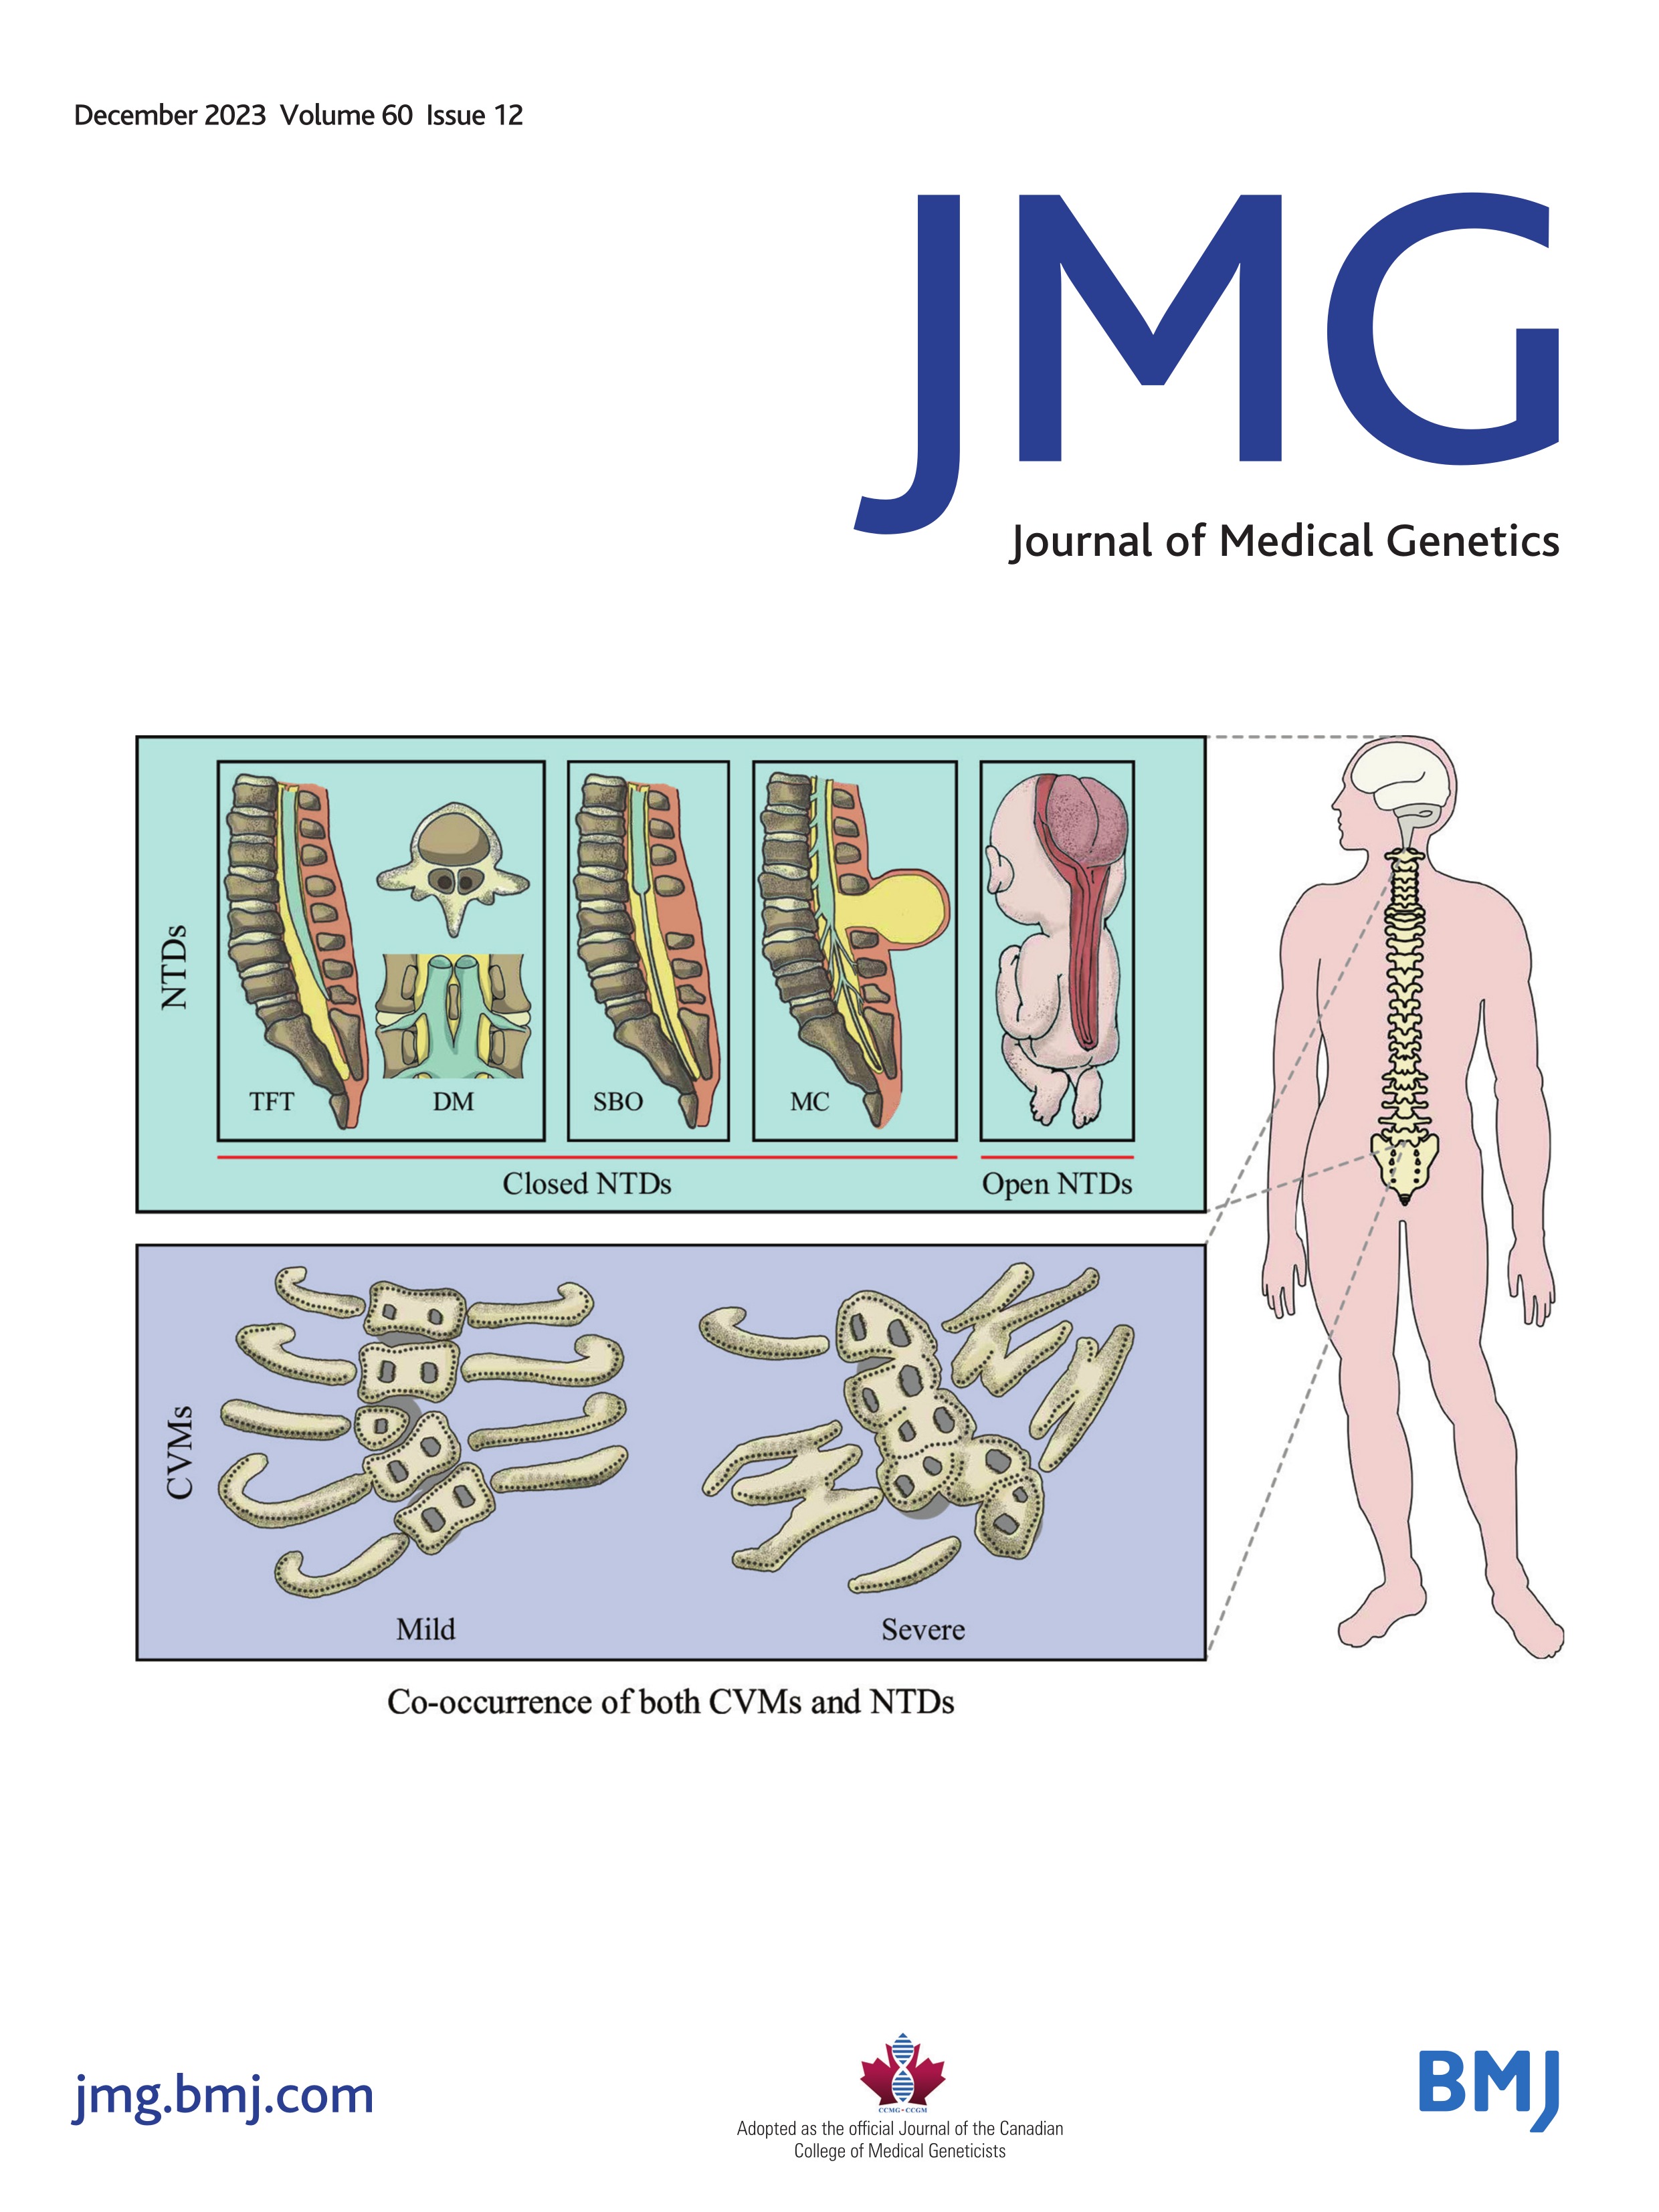 Ureteropelvic junction obstruction with primary lymphoedema associated with CELSR1 variants